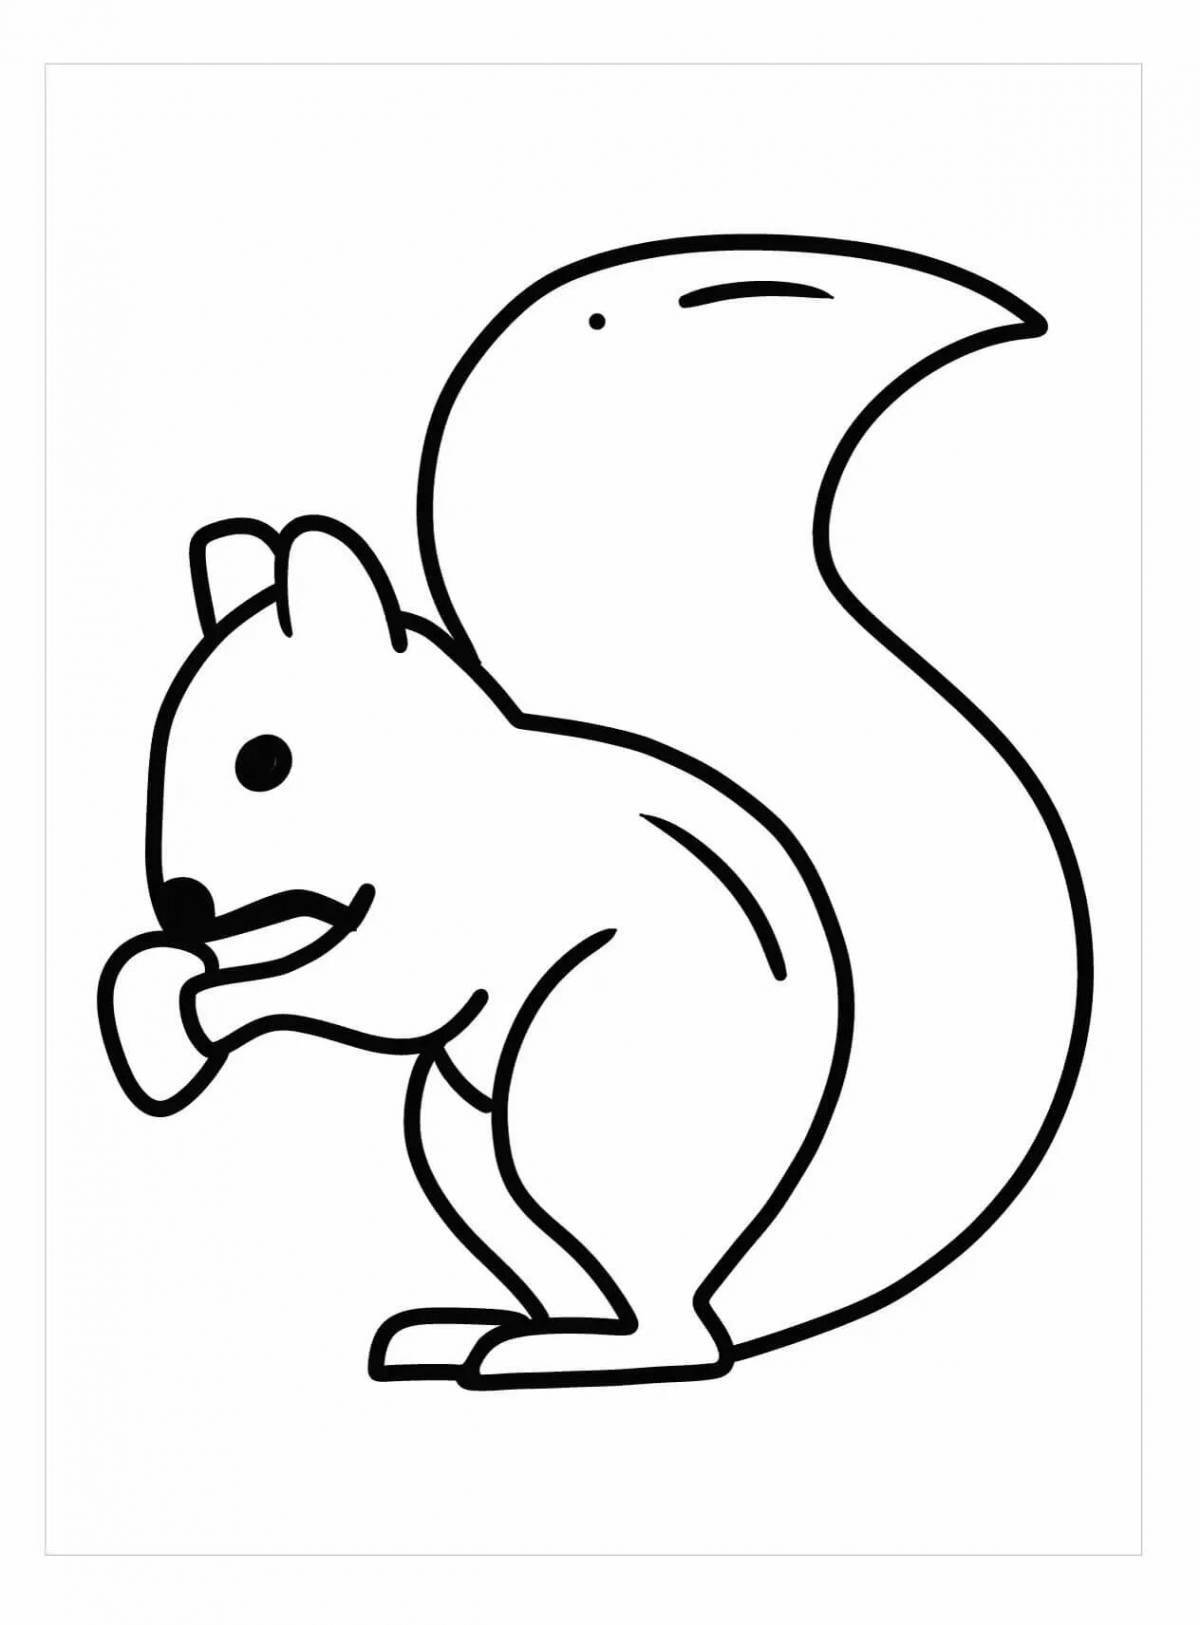 A funny squirrel coloring book for kids 6-7 years old